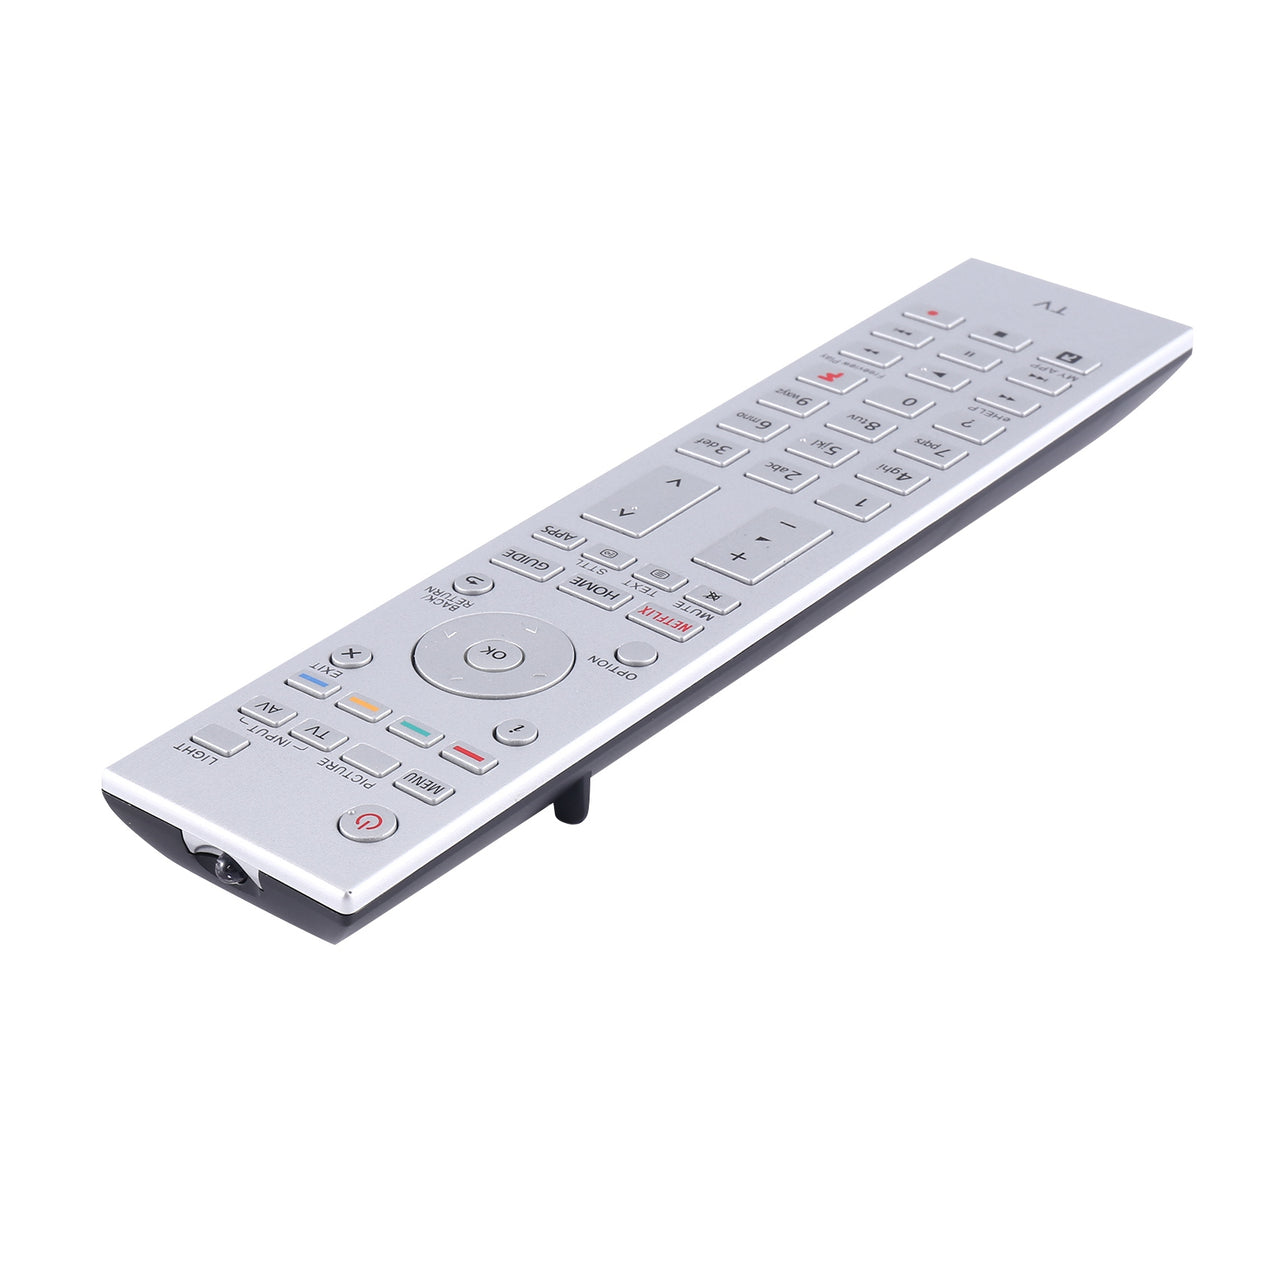 N2QAYA000153 Replacement Remote for Panasonic Televisions